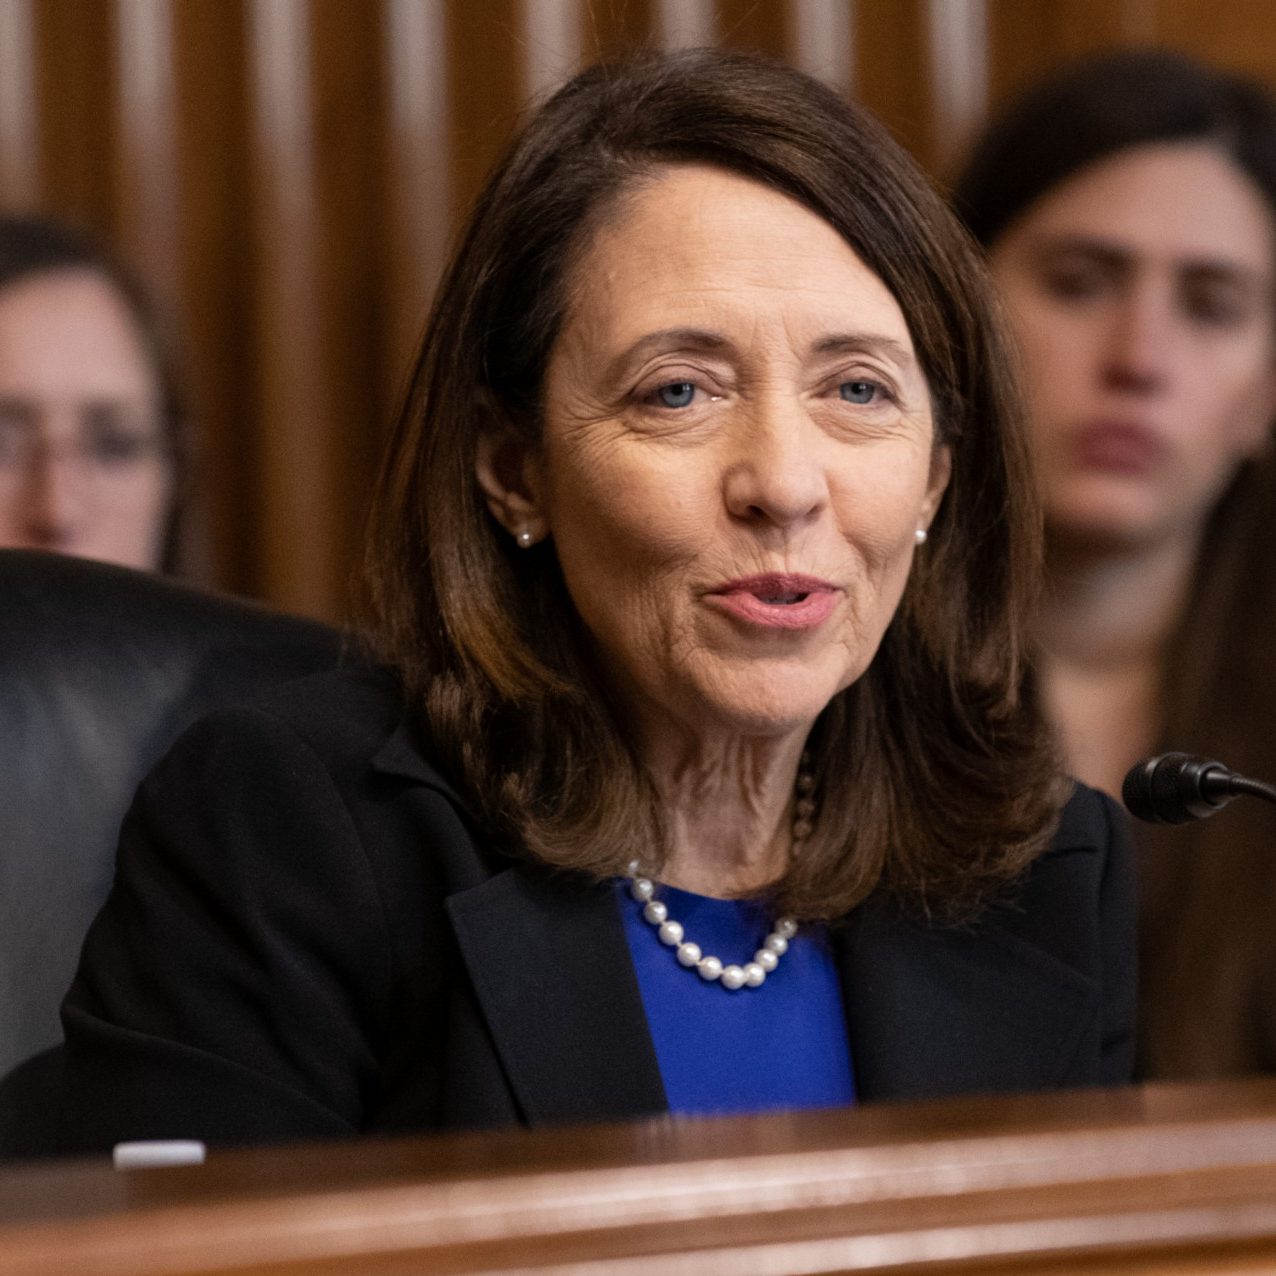 The Honorable Maria Cantwell